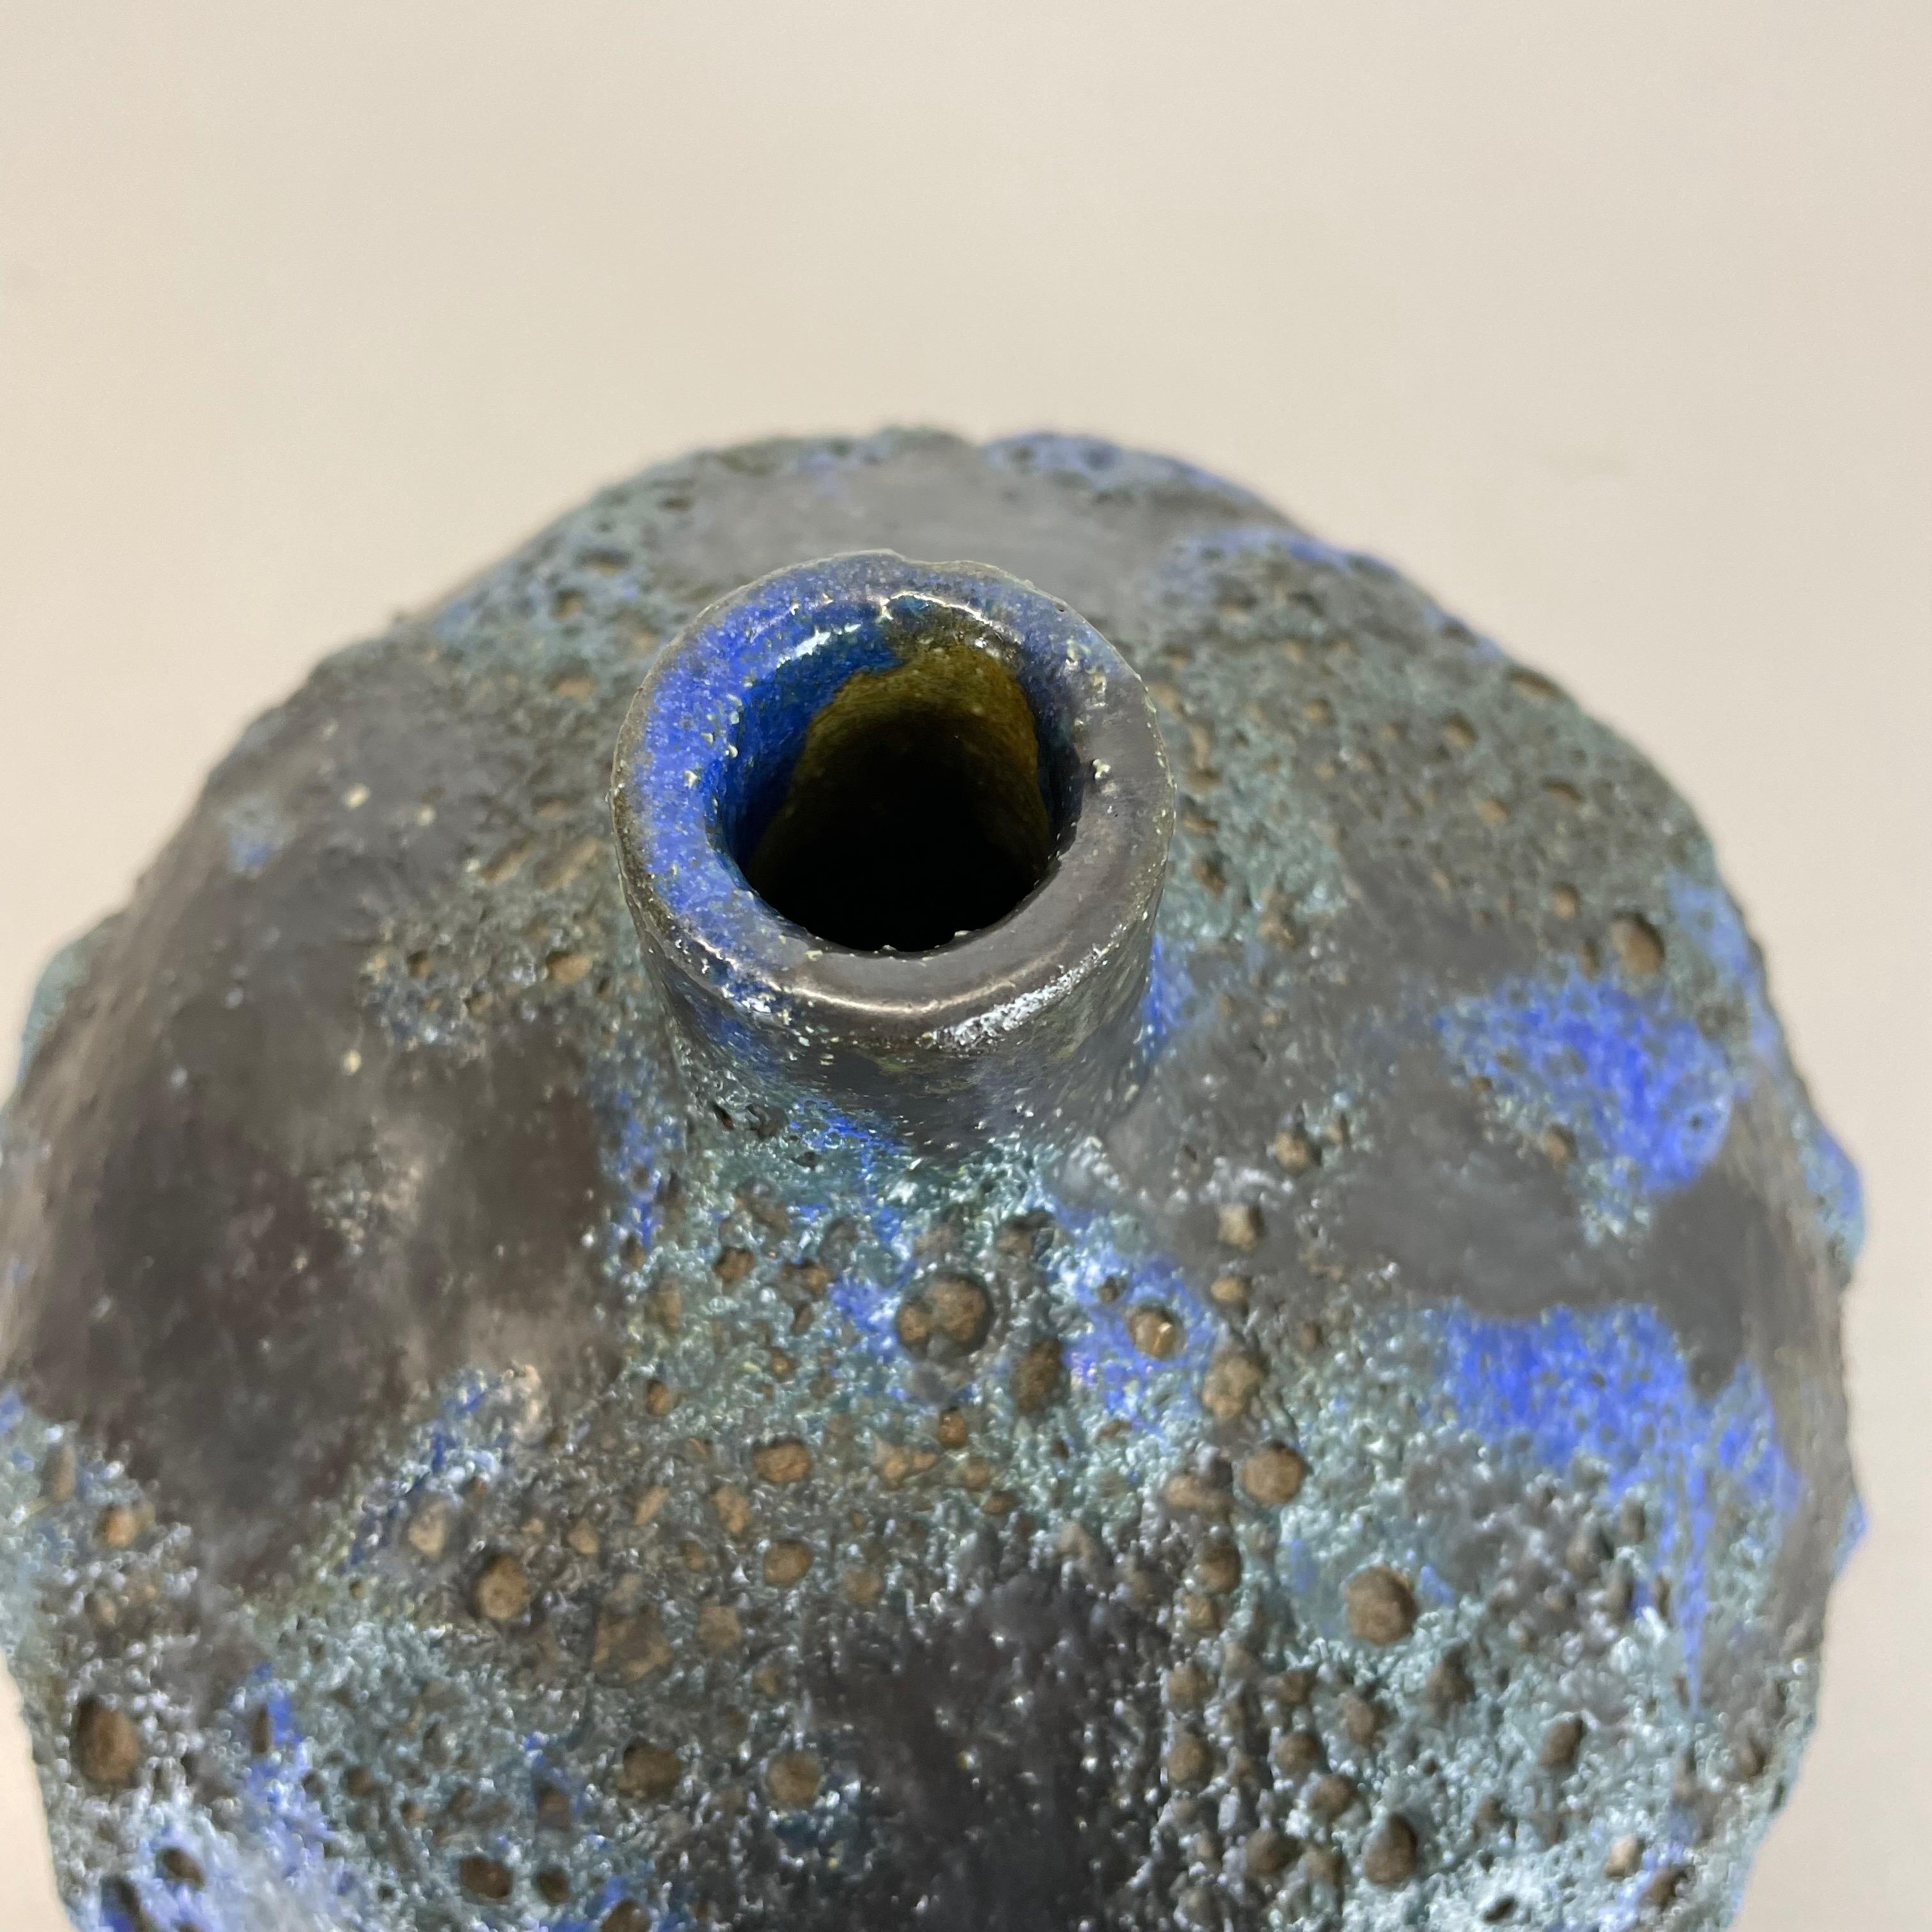 Abstract Ceramic Studio Pottery Vase by Gerhard Liebenthron, Germany, 1970s For Sale 6